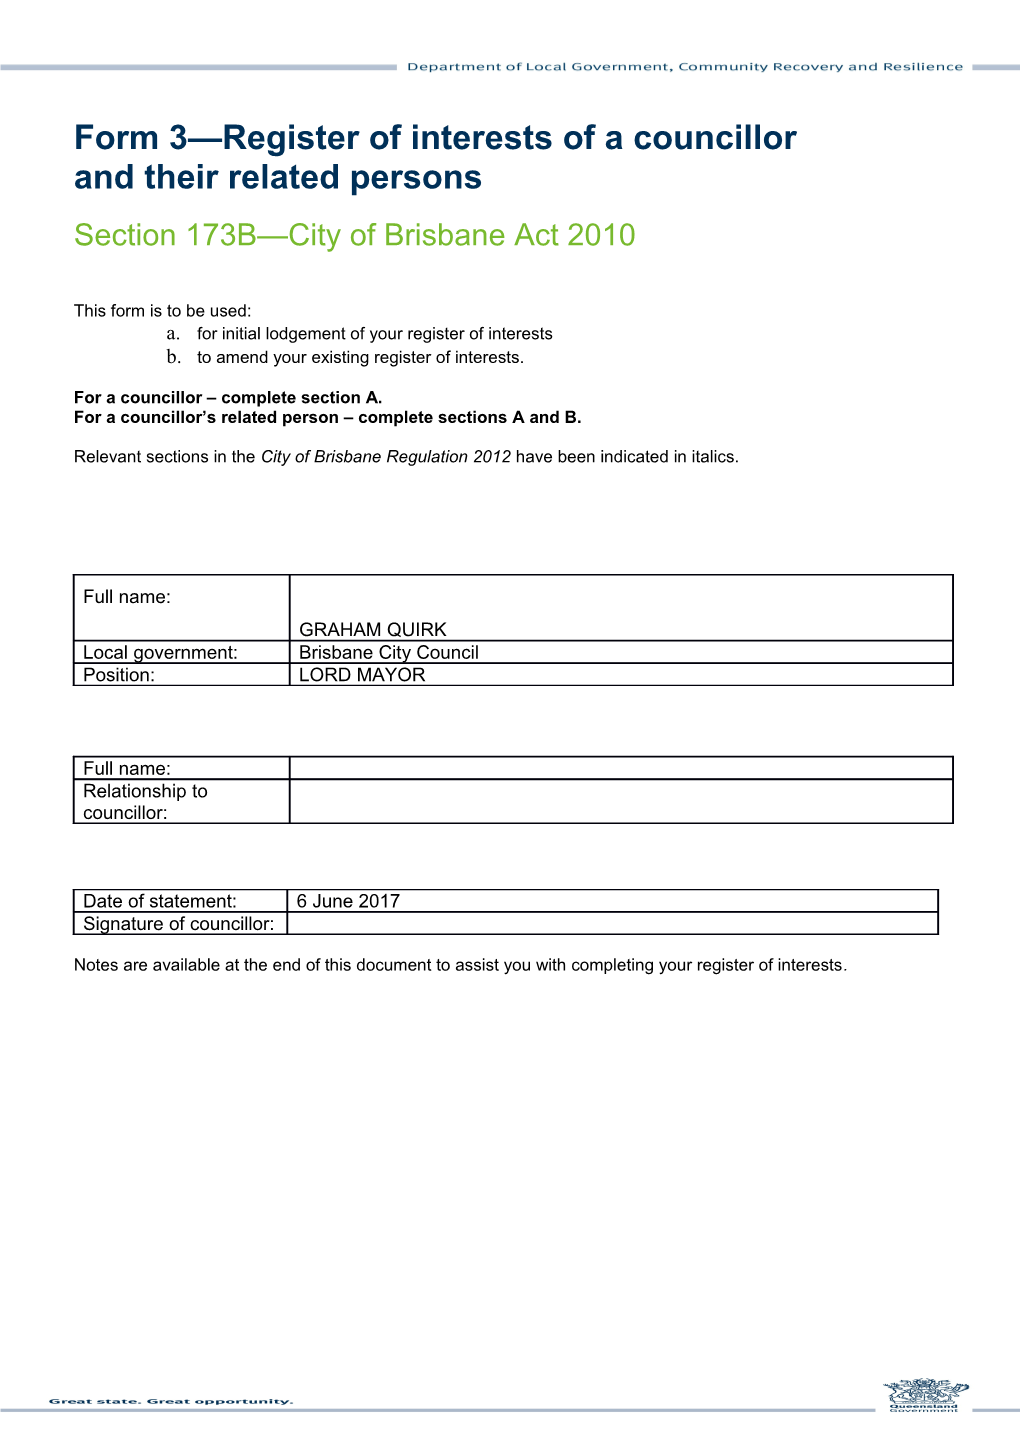 Form 3 - Register of Interests of a Councillor and Their Related Persons